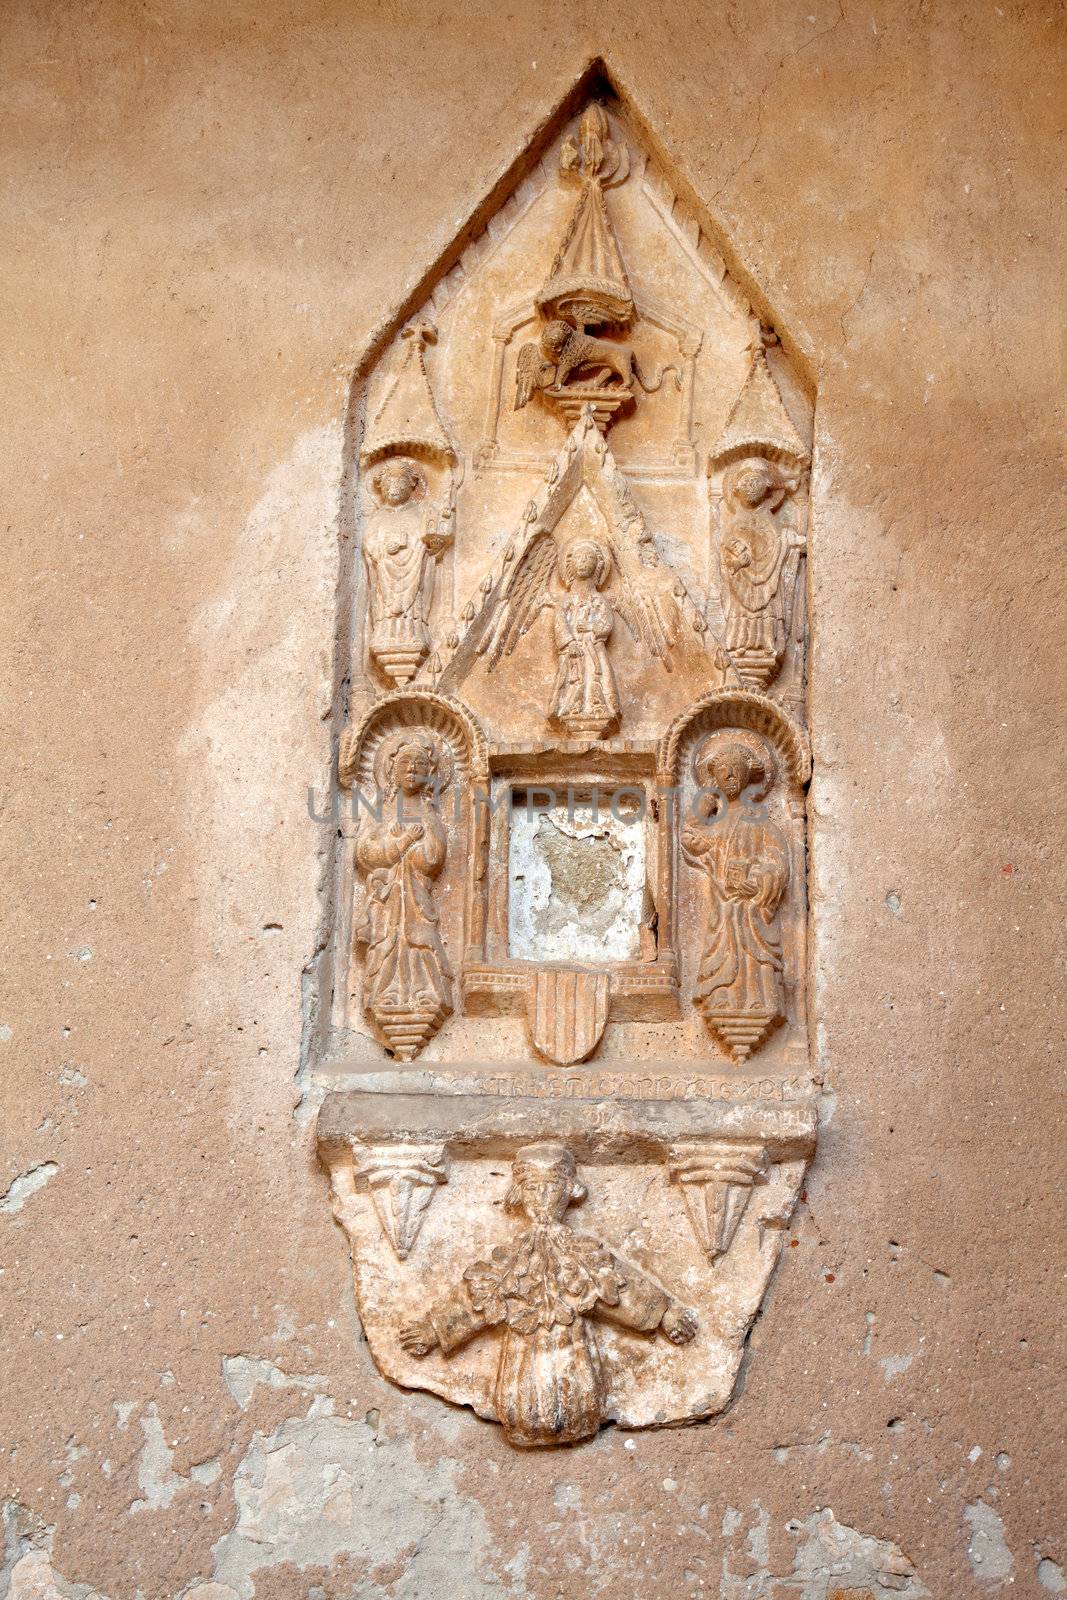 religious stone carving, on the wall by motorolka